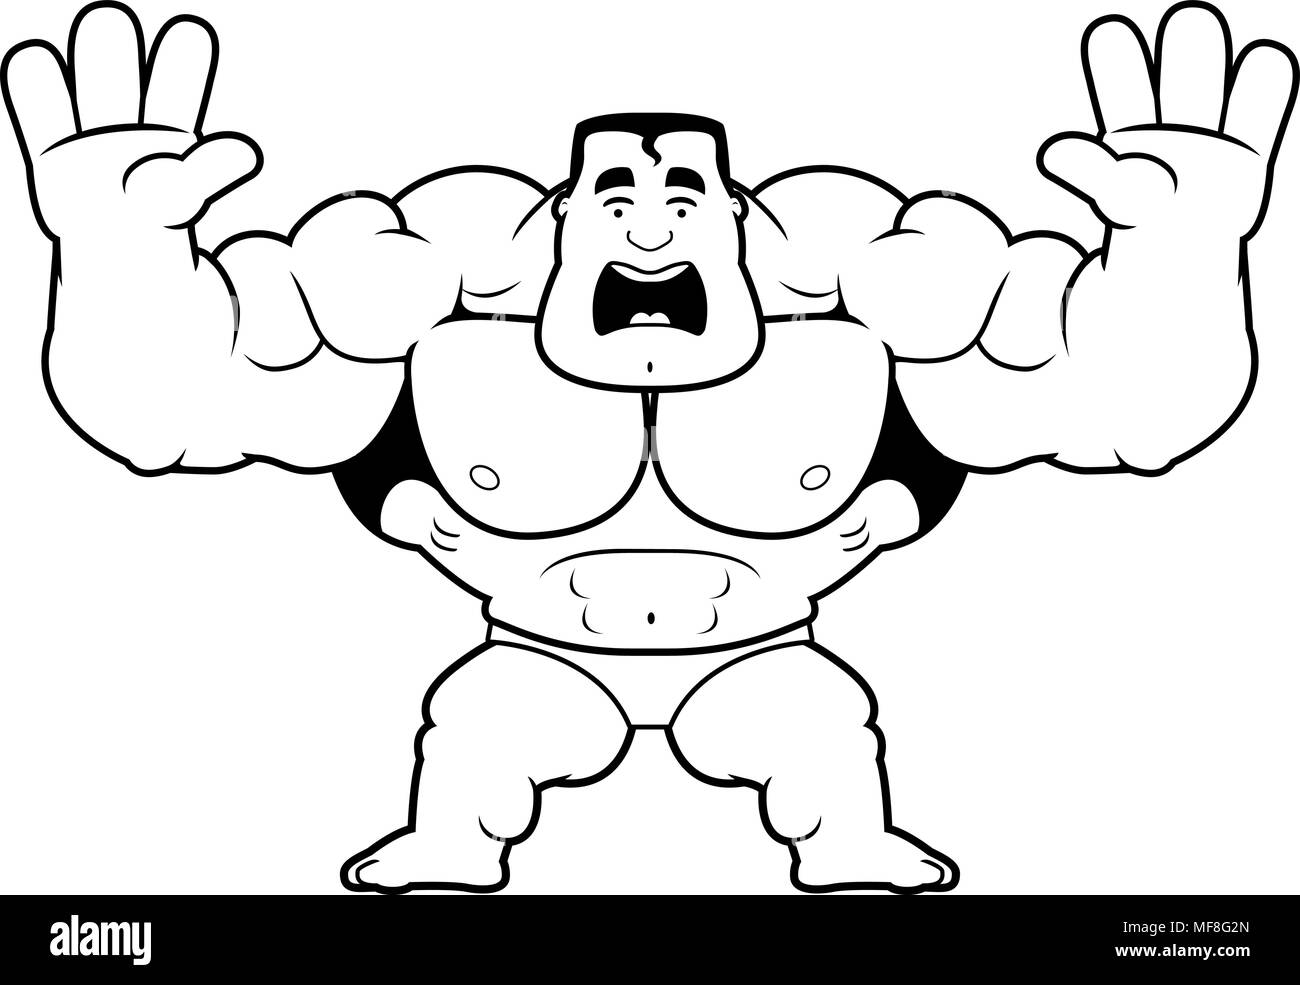 Cartoon bodybuilder Cut Out Stock Images & Pictures - Alamy